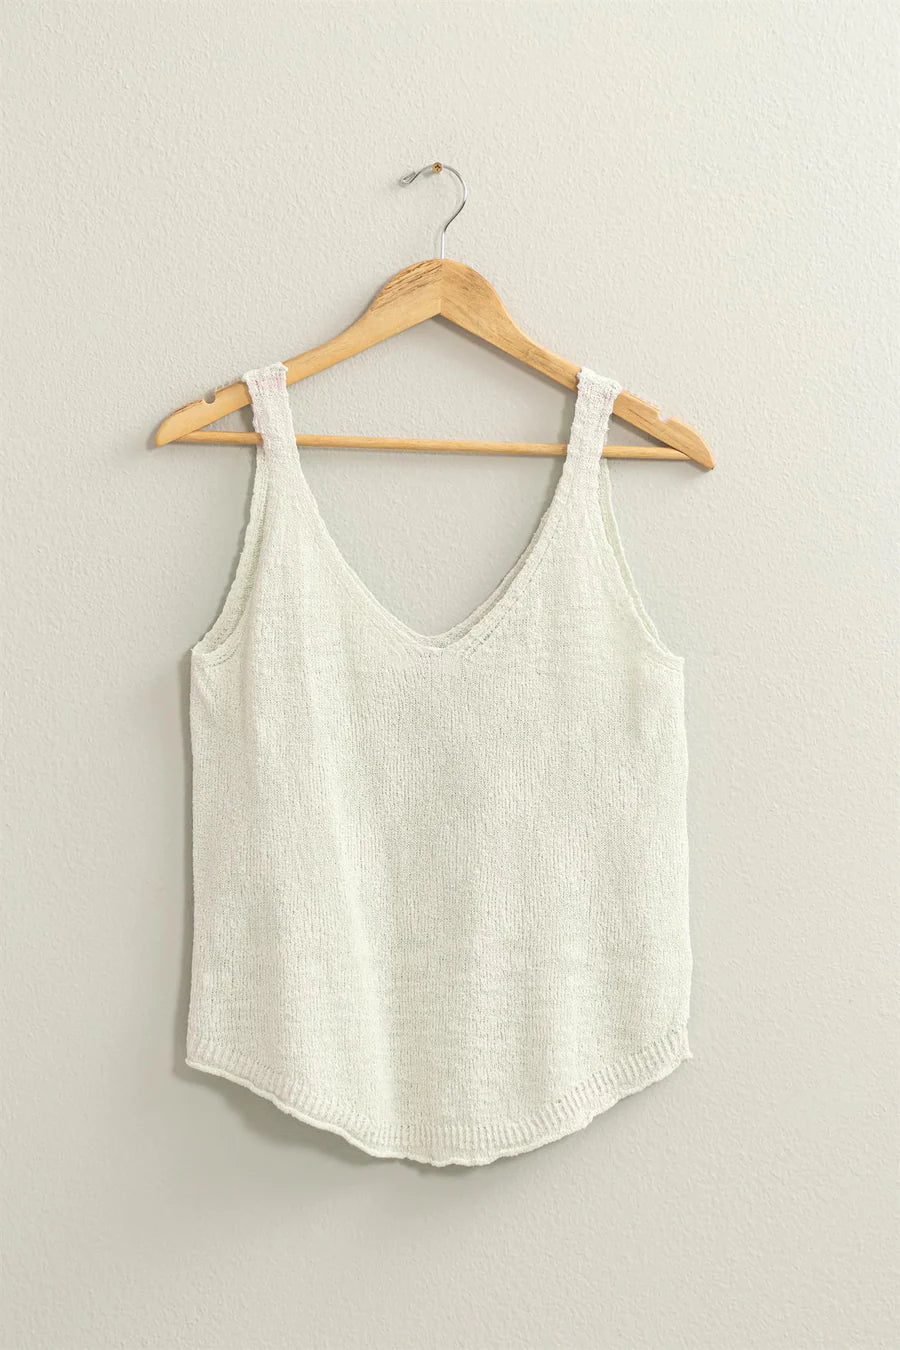 full view of white colored Terry Sleeveless Top with a V neck and shoulder straps, featuring a relaxed fit. Made from 75% cotton and 25% polyester, ideal for pairing with shorts, pants, or skirts